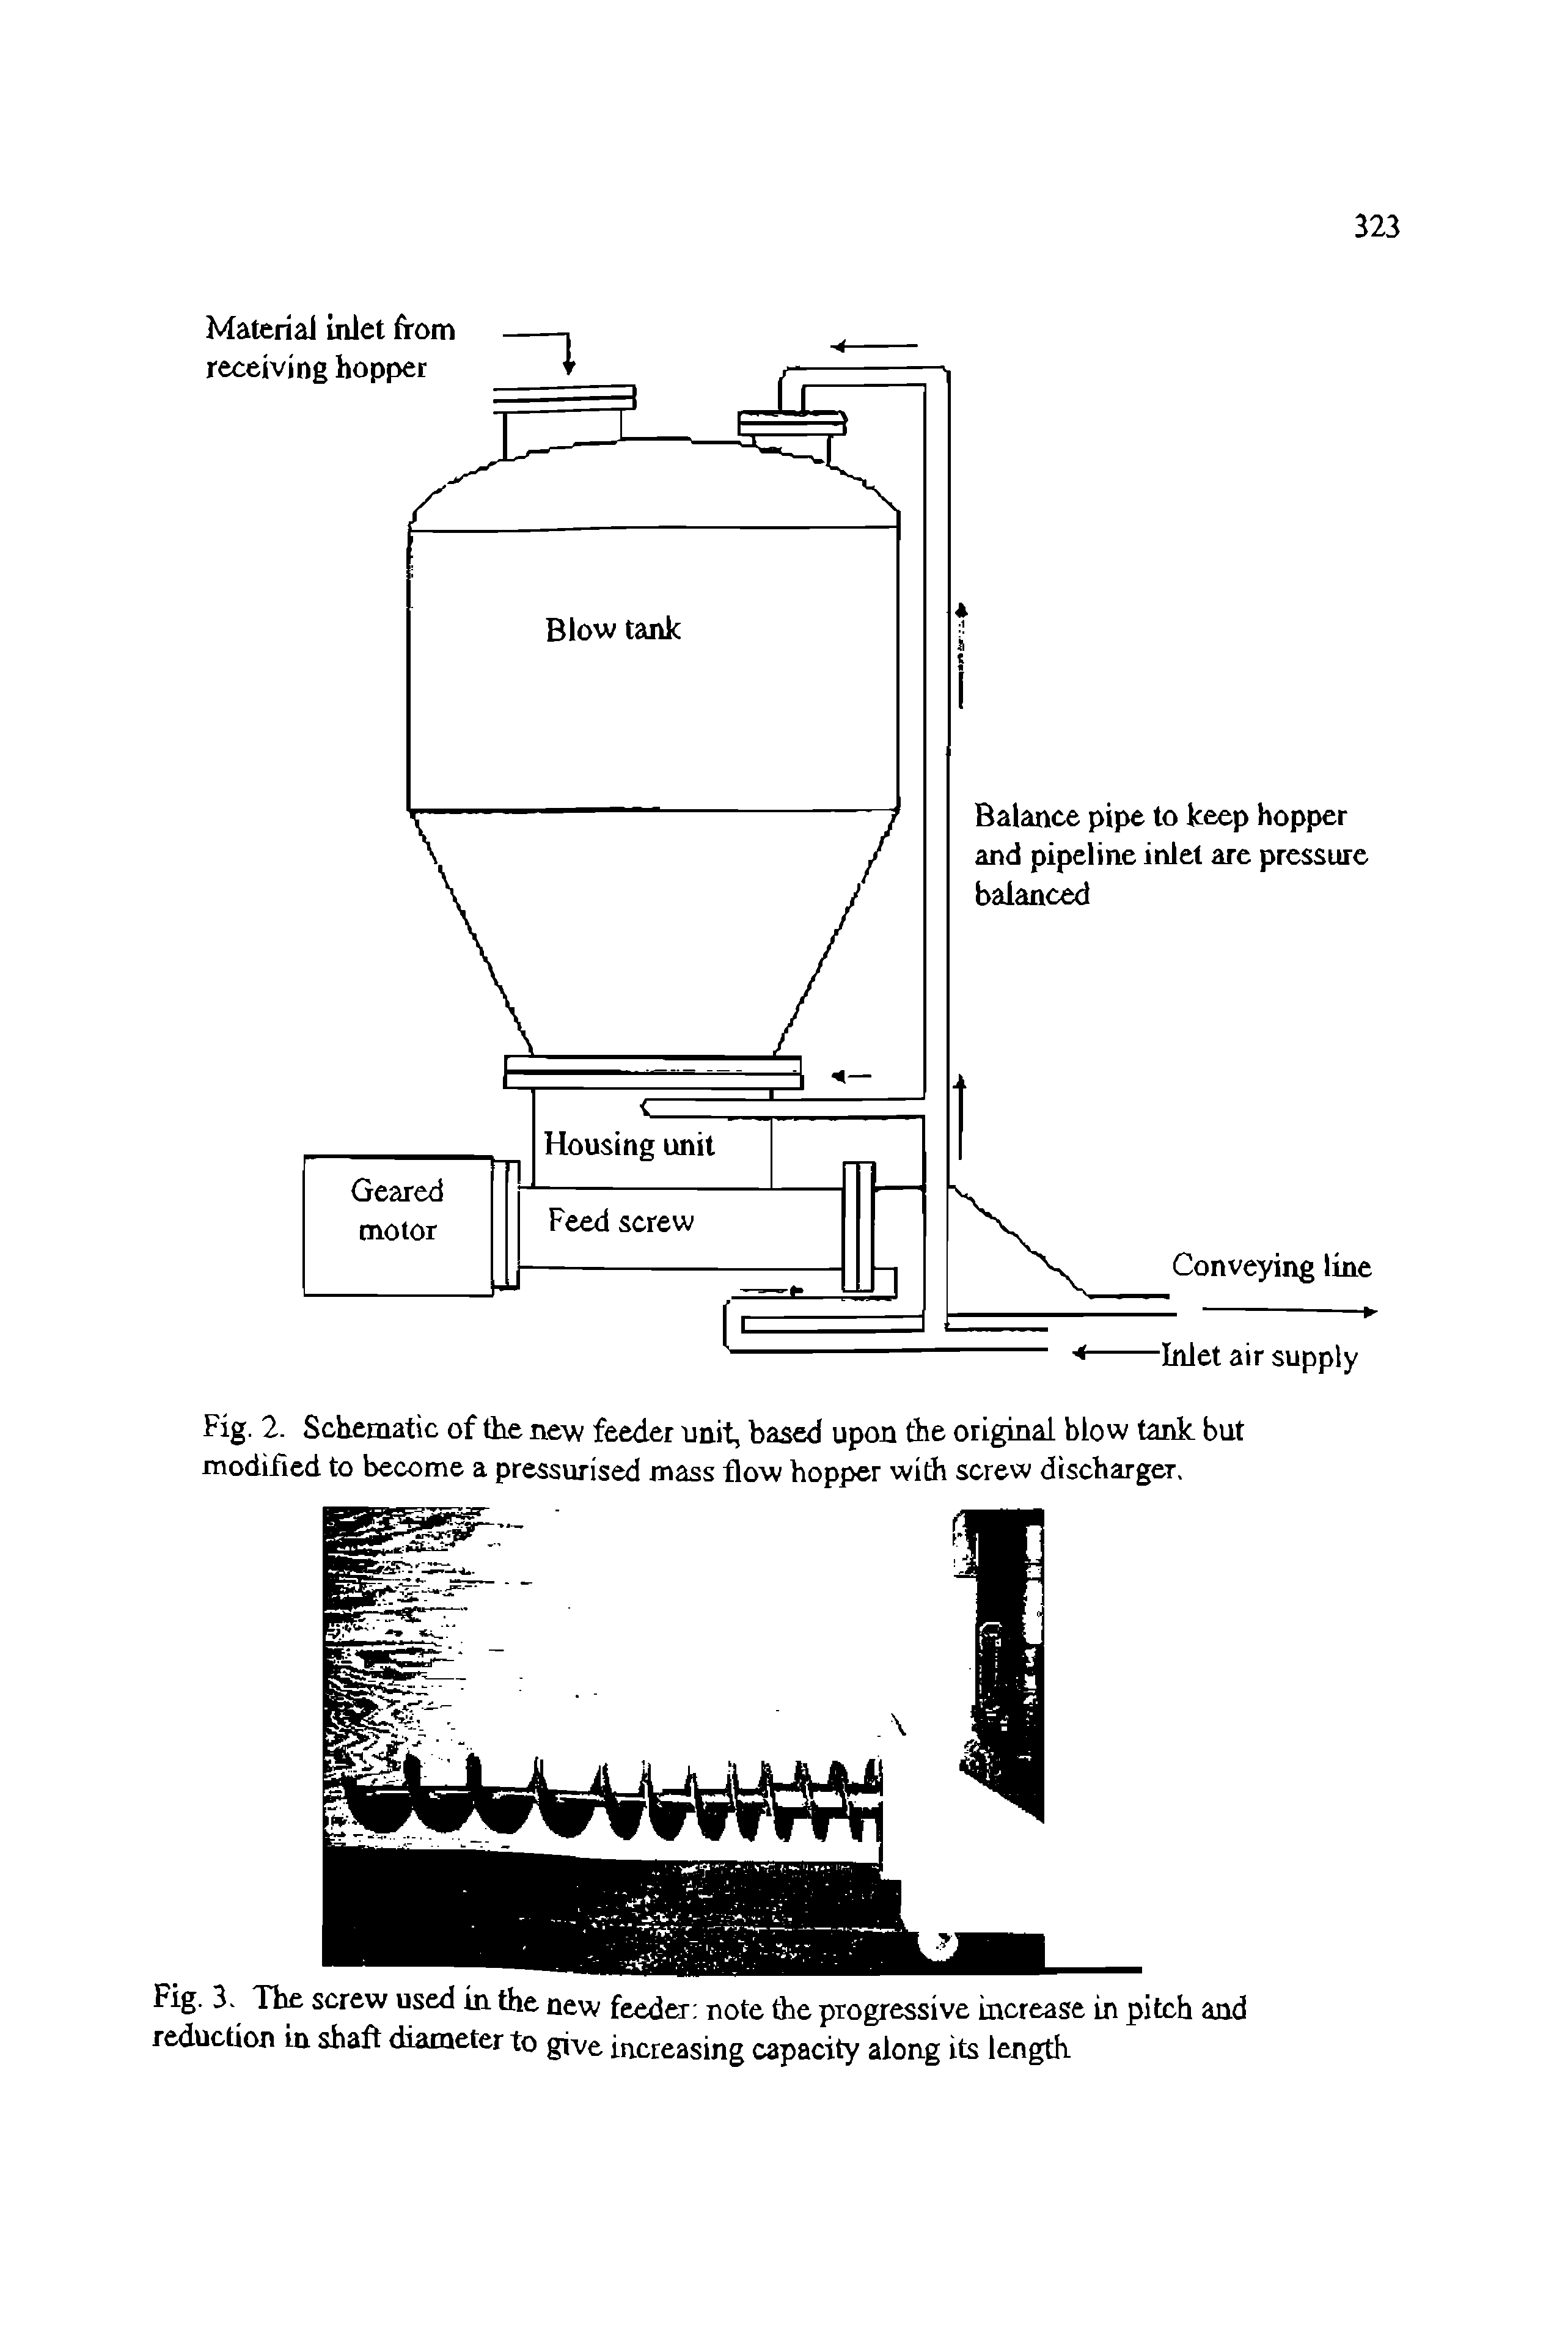 Fig. 2. Schematic of the new feeder unit, based upon (be original blow tank but modified to become a pressurised mass flow hopper with screw discharger.